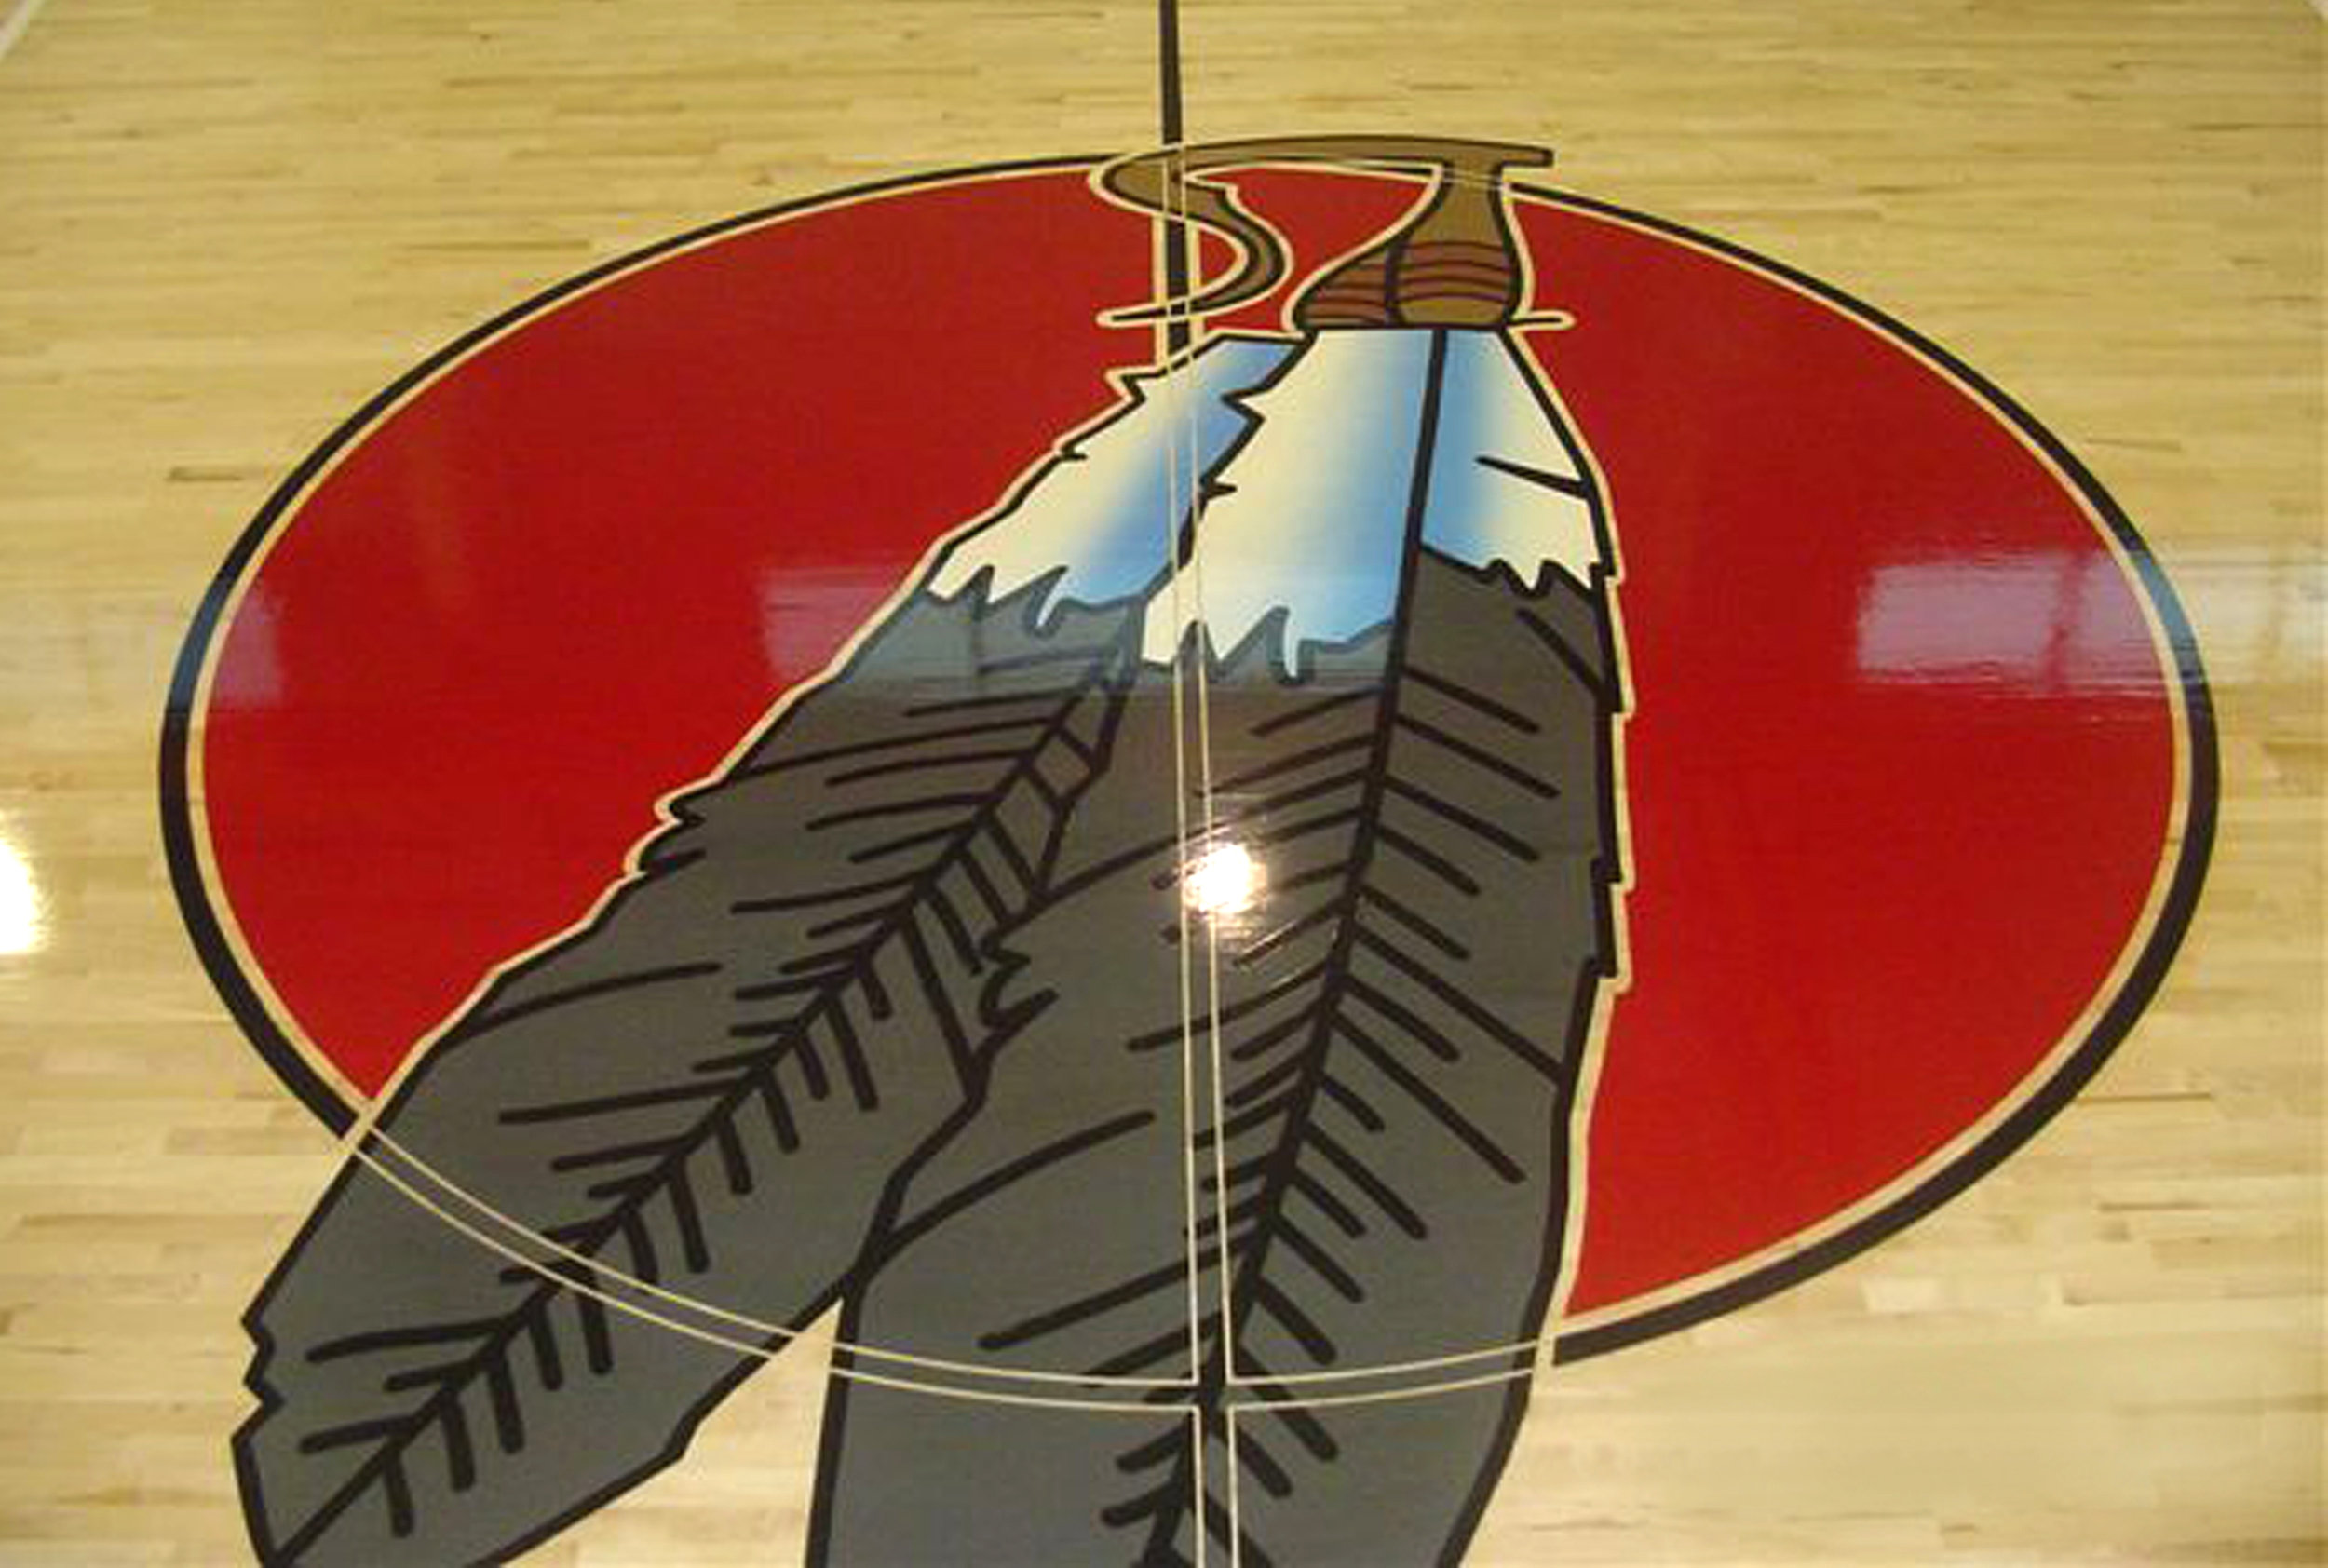 Soboba gym wood floor hand painted graphics